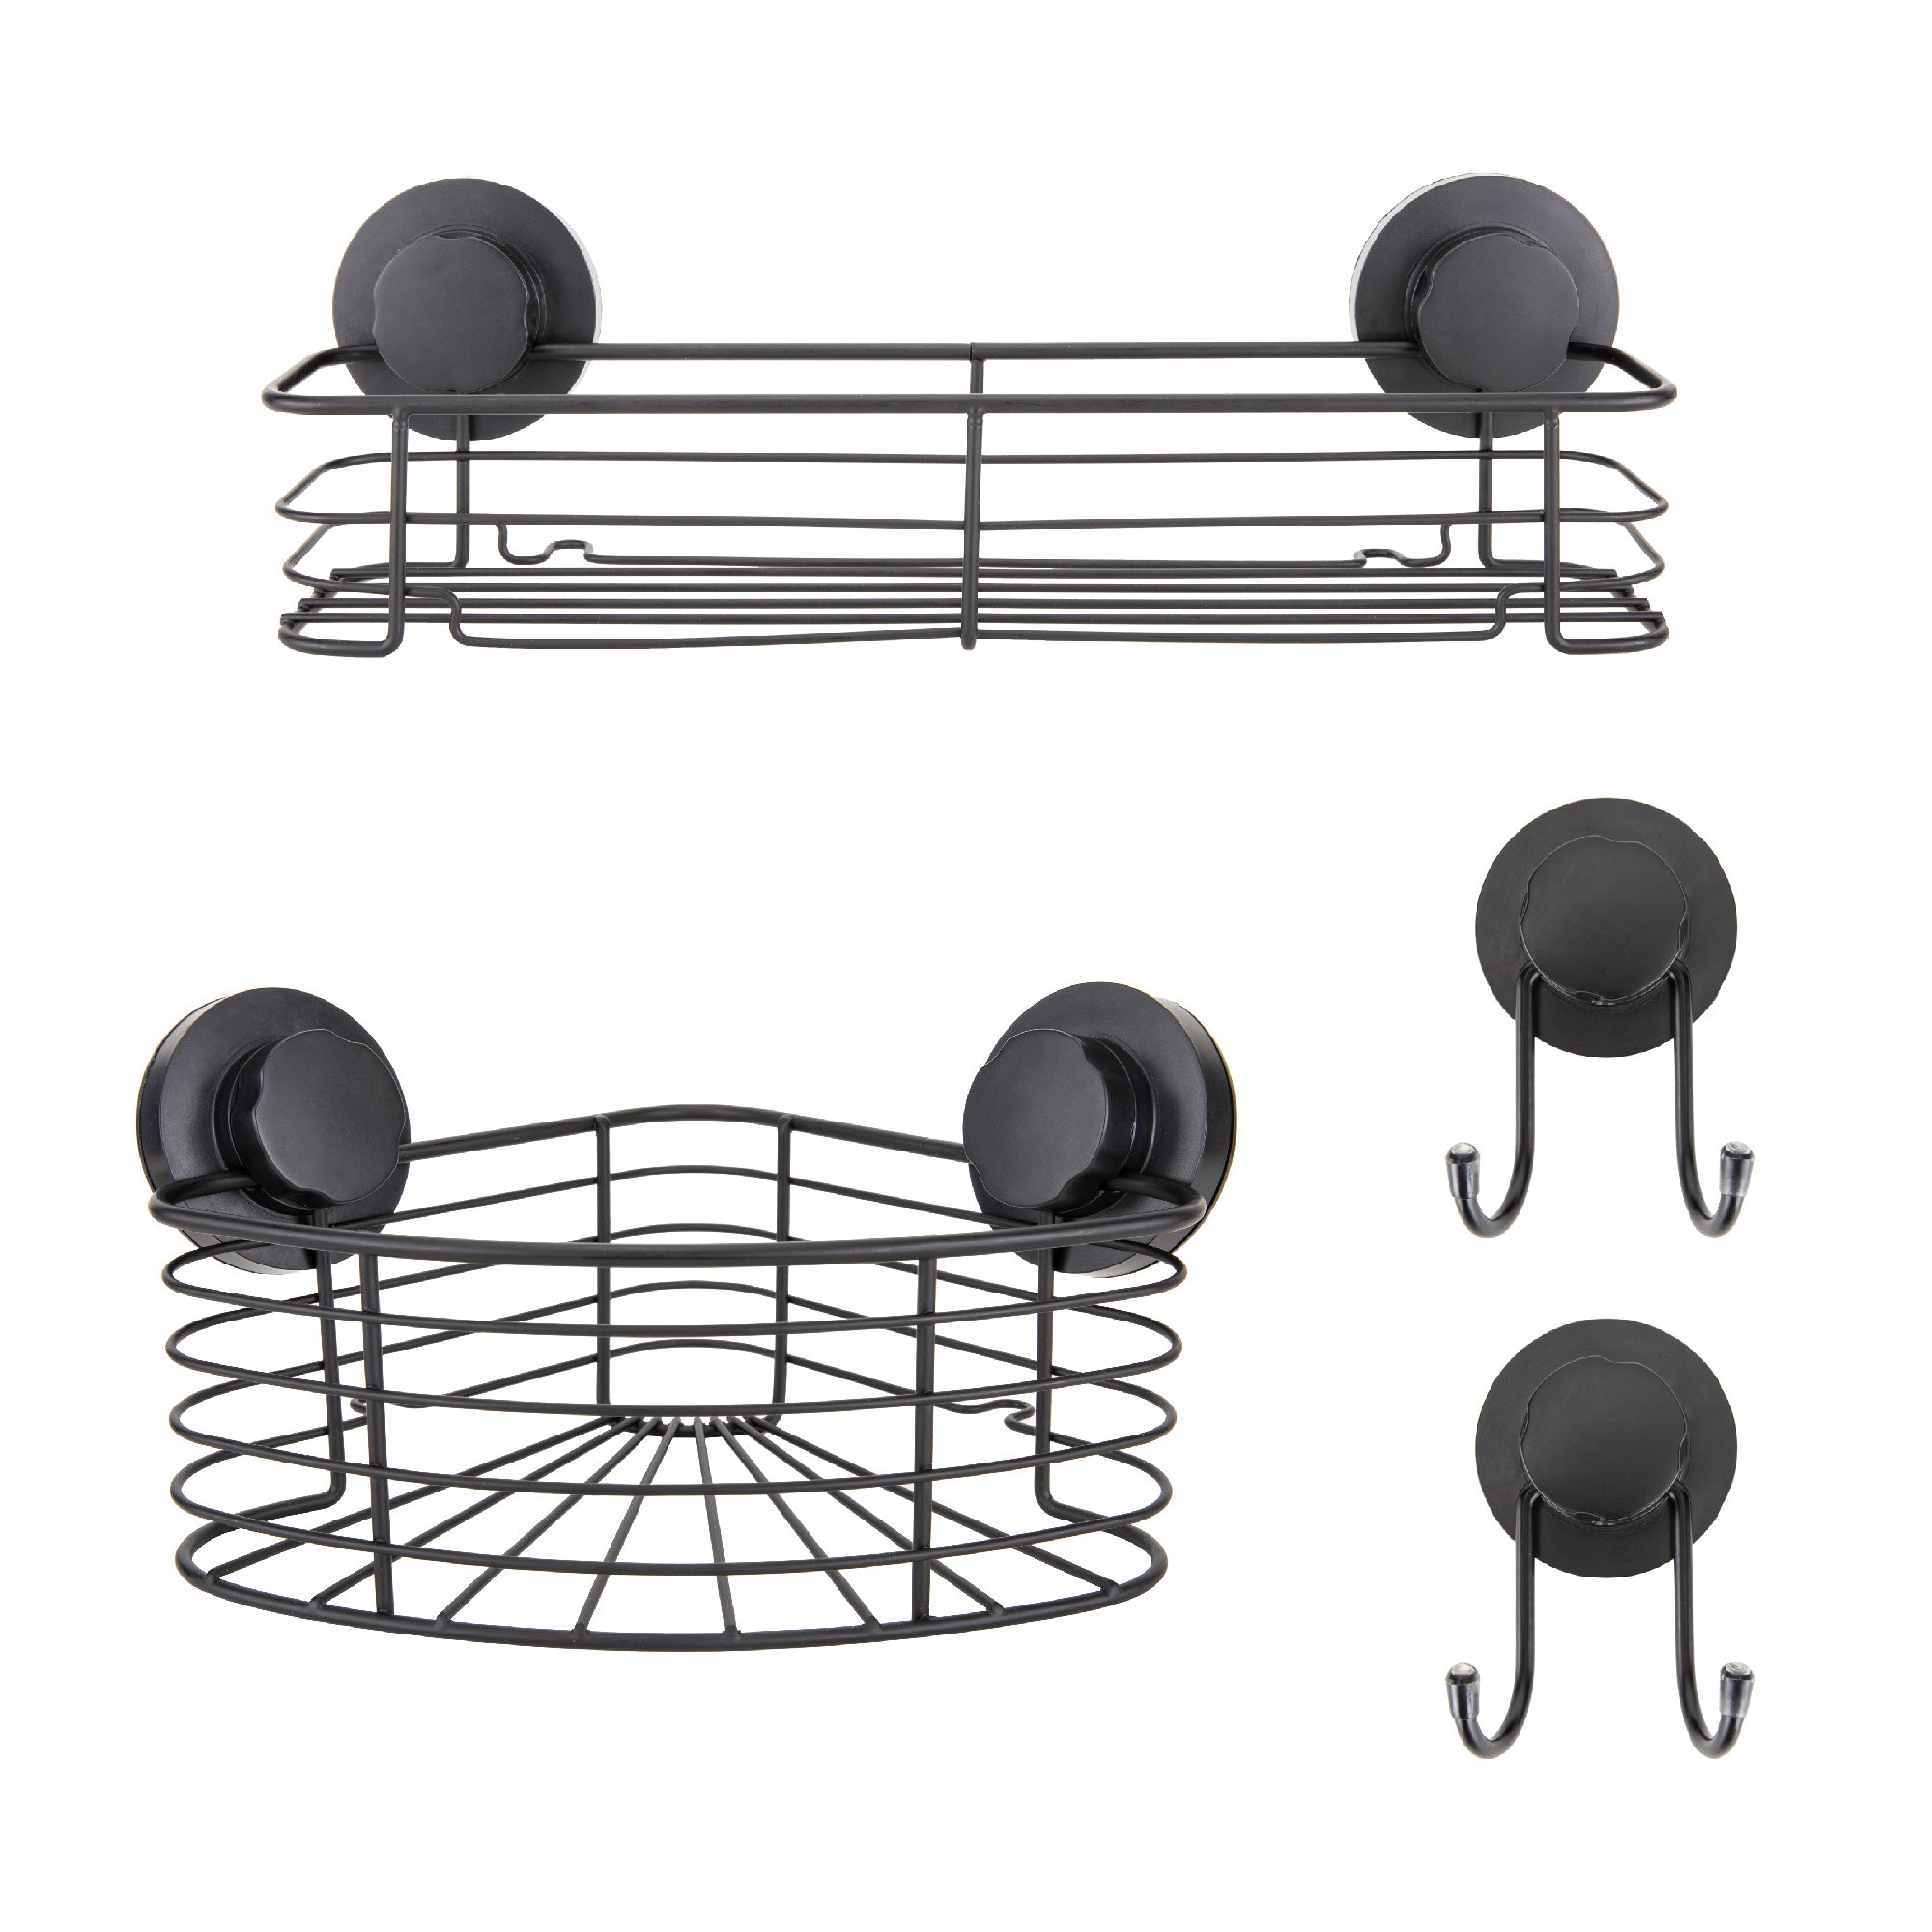 Large Corner Shower Caddy - Antimicrobial Caddy